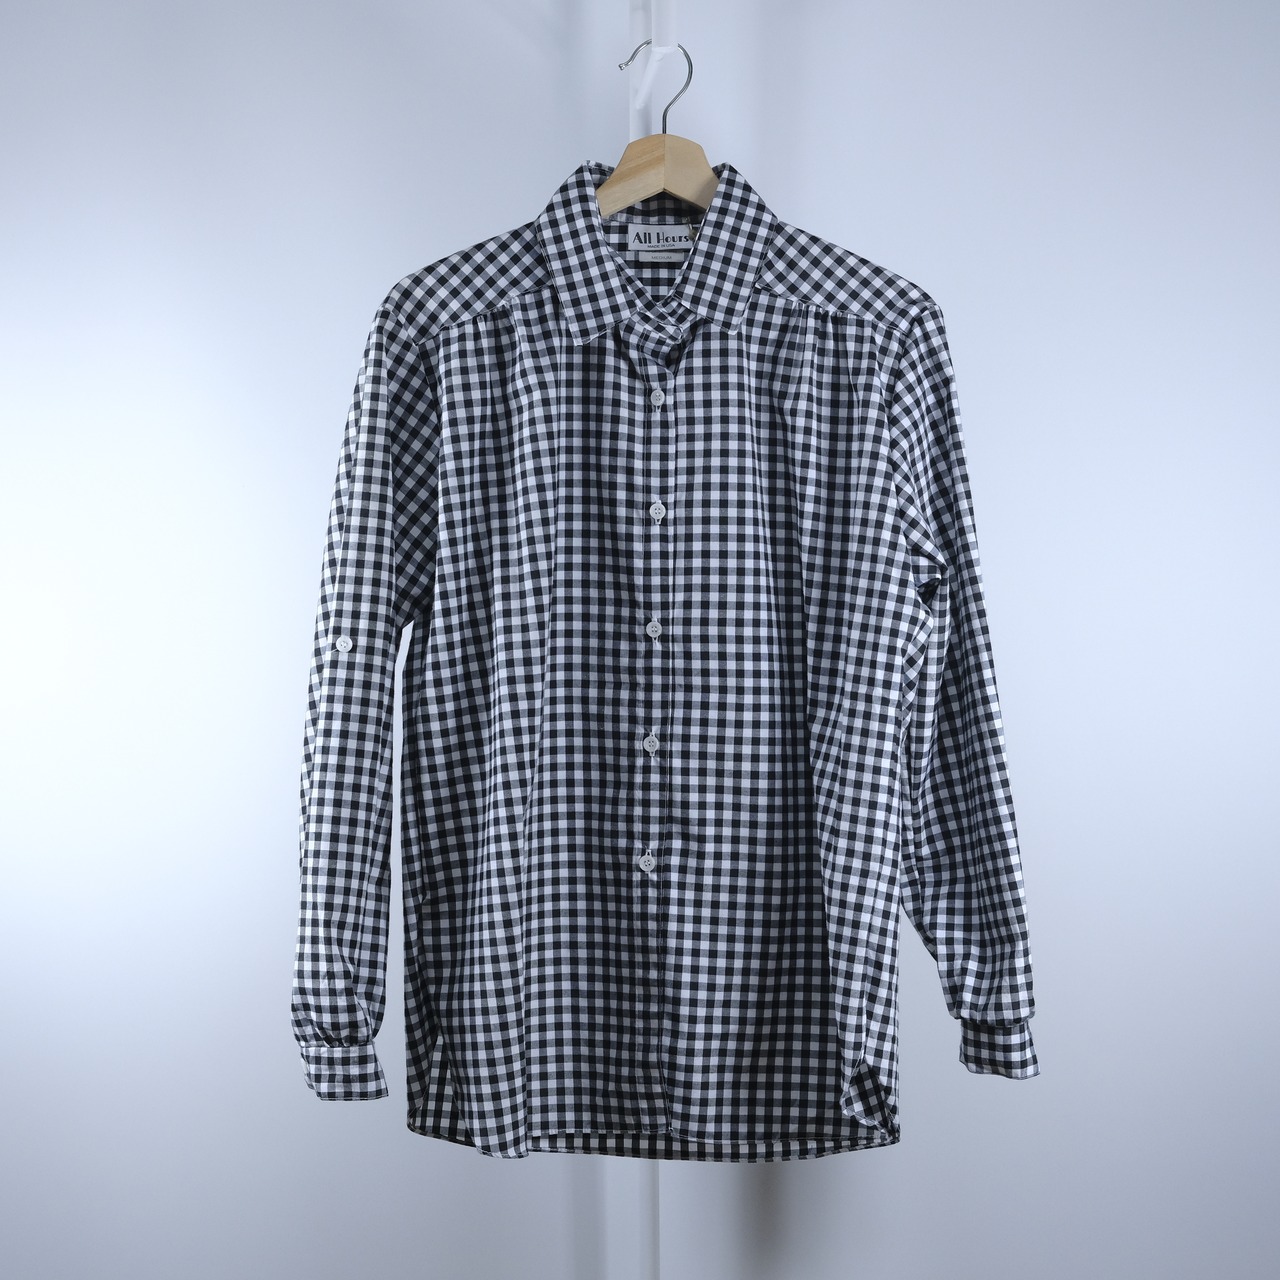 “All Hours” Gingham Checked Shirts